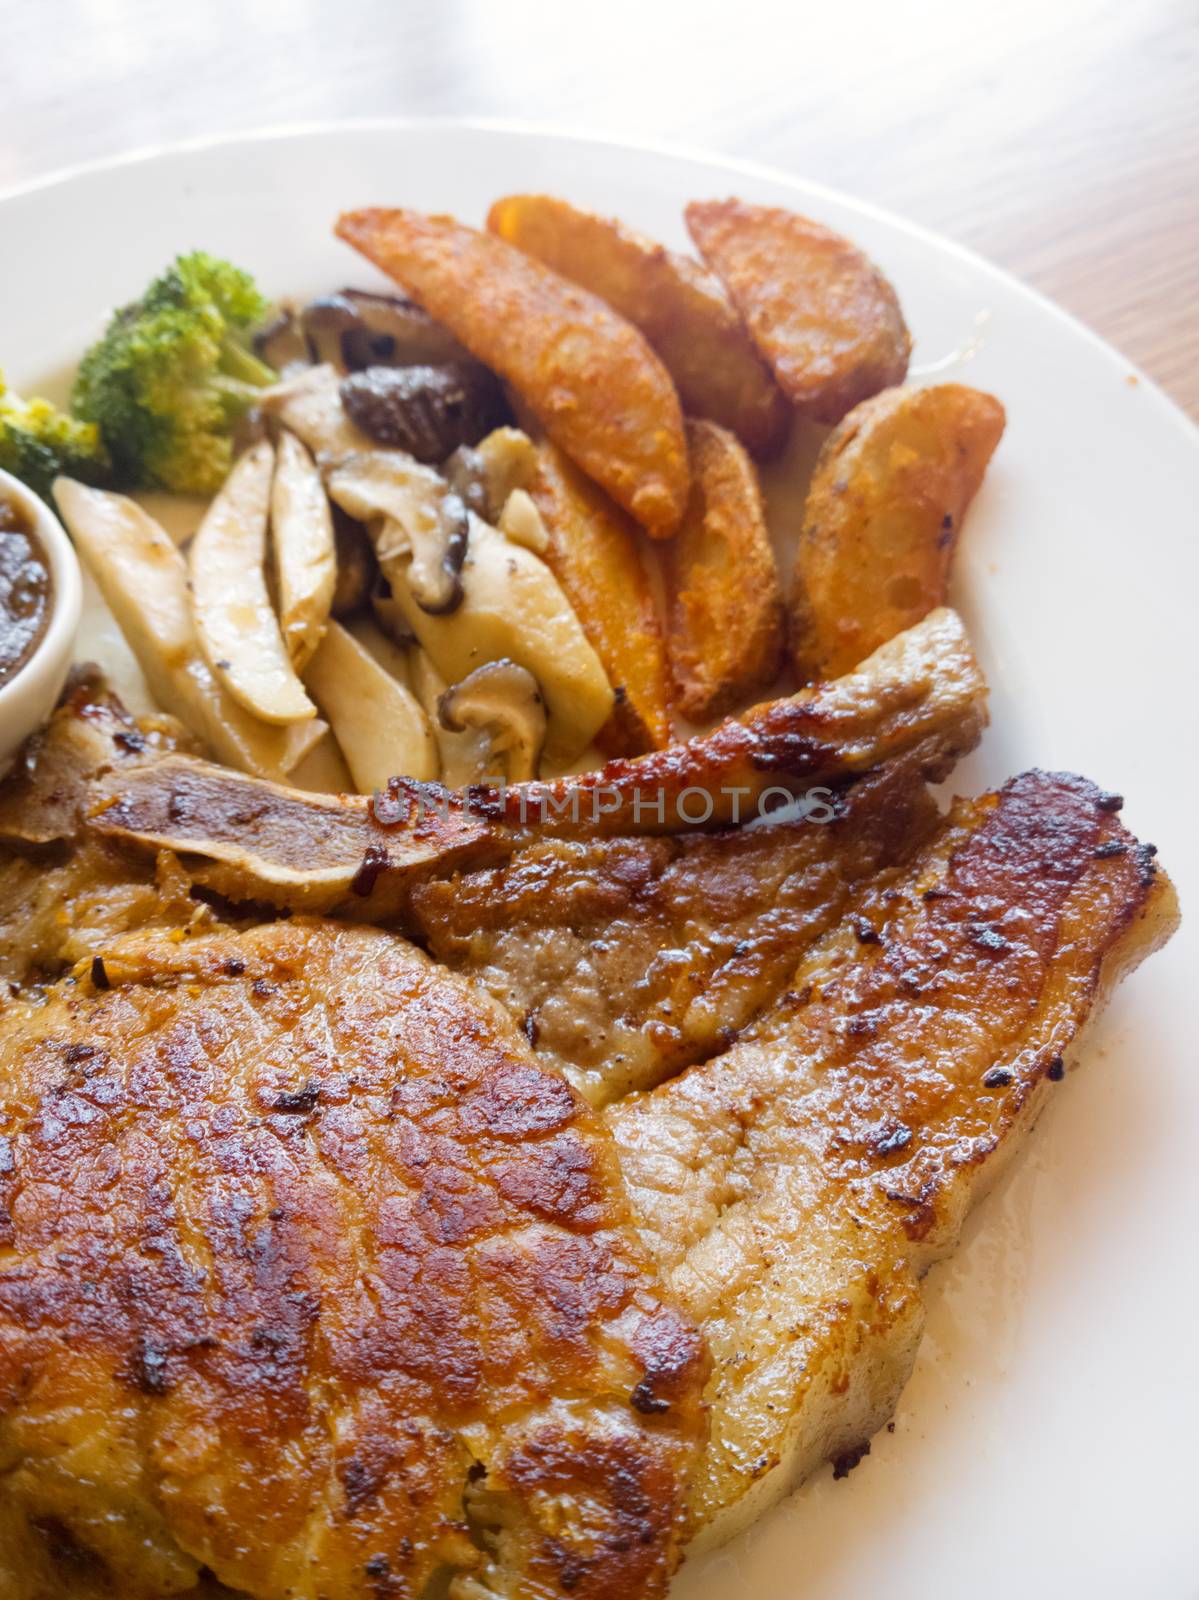 Pork steak with vegetables and french fried